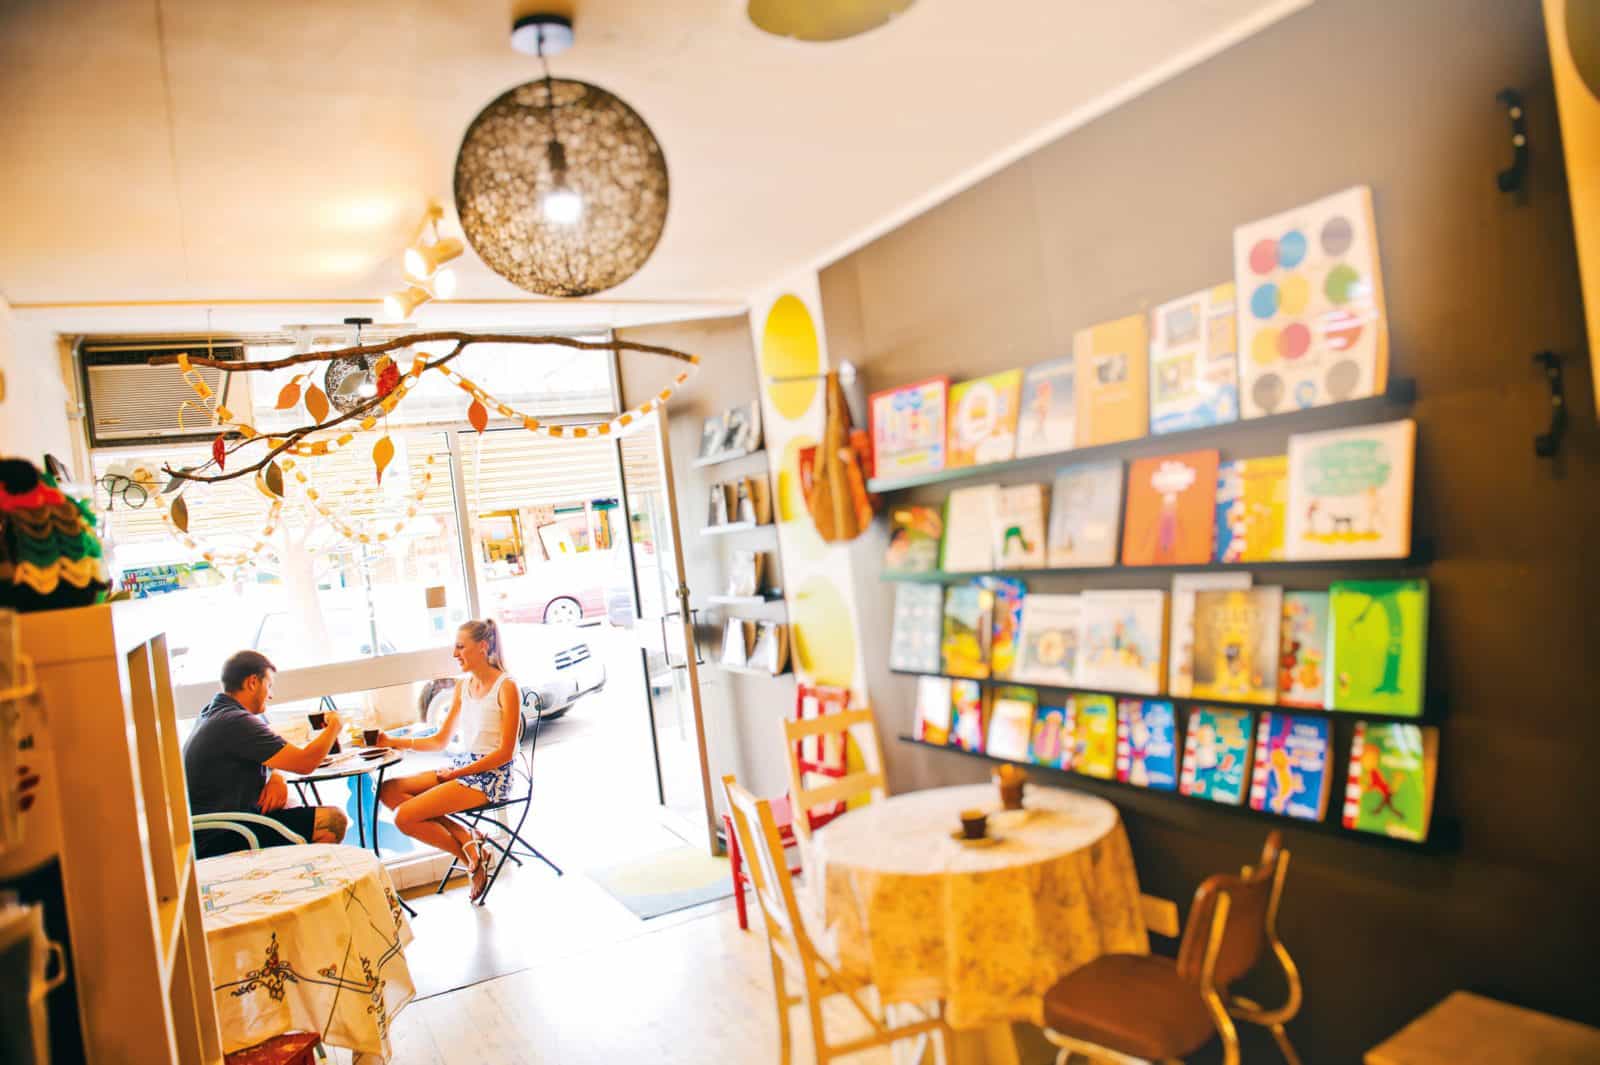 Country Shopping, Cafes, Books